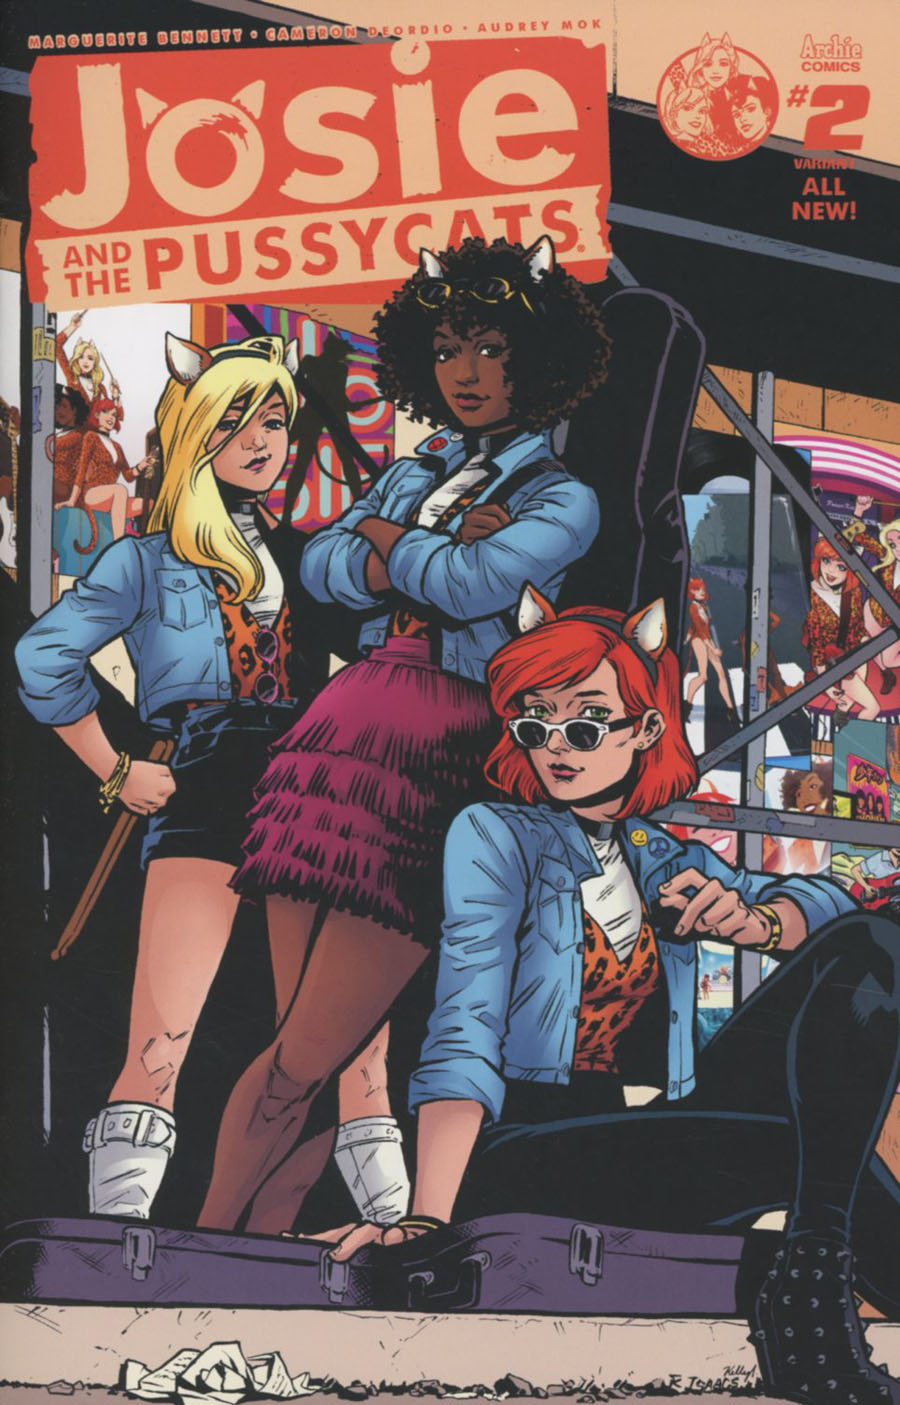 Josie And The Pussycats Vol 2 #2 Cover B Variant Rebekah Isaacs Cover